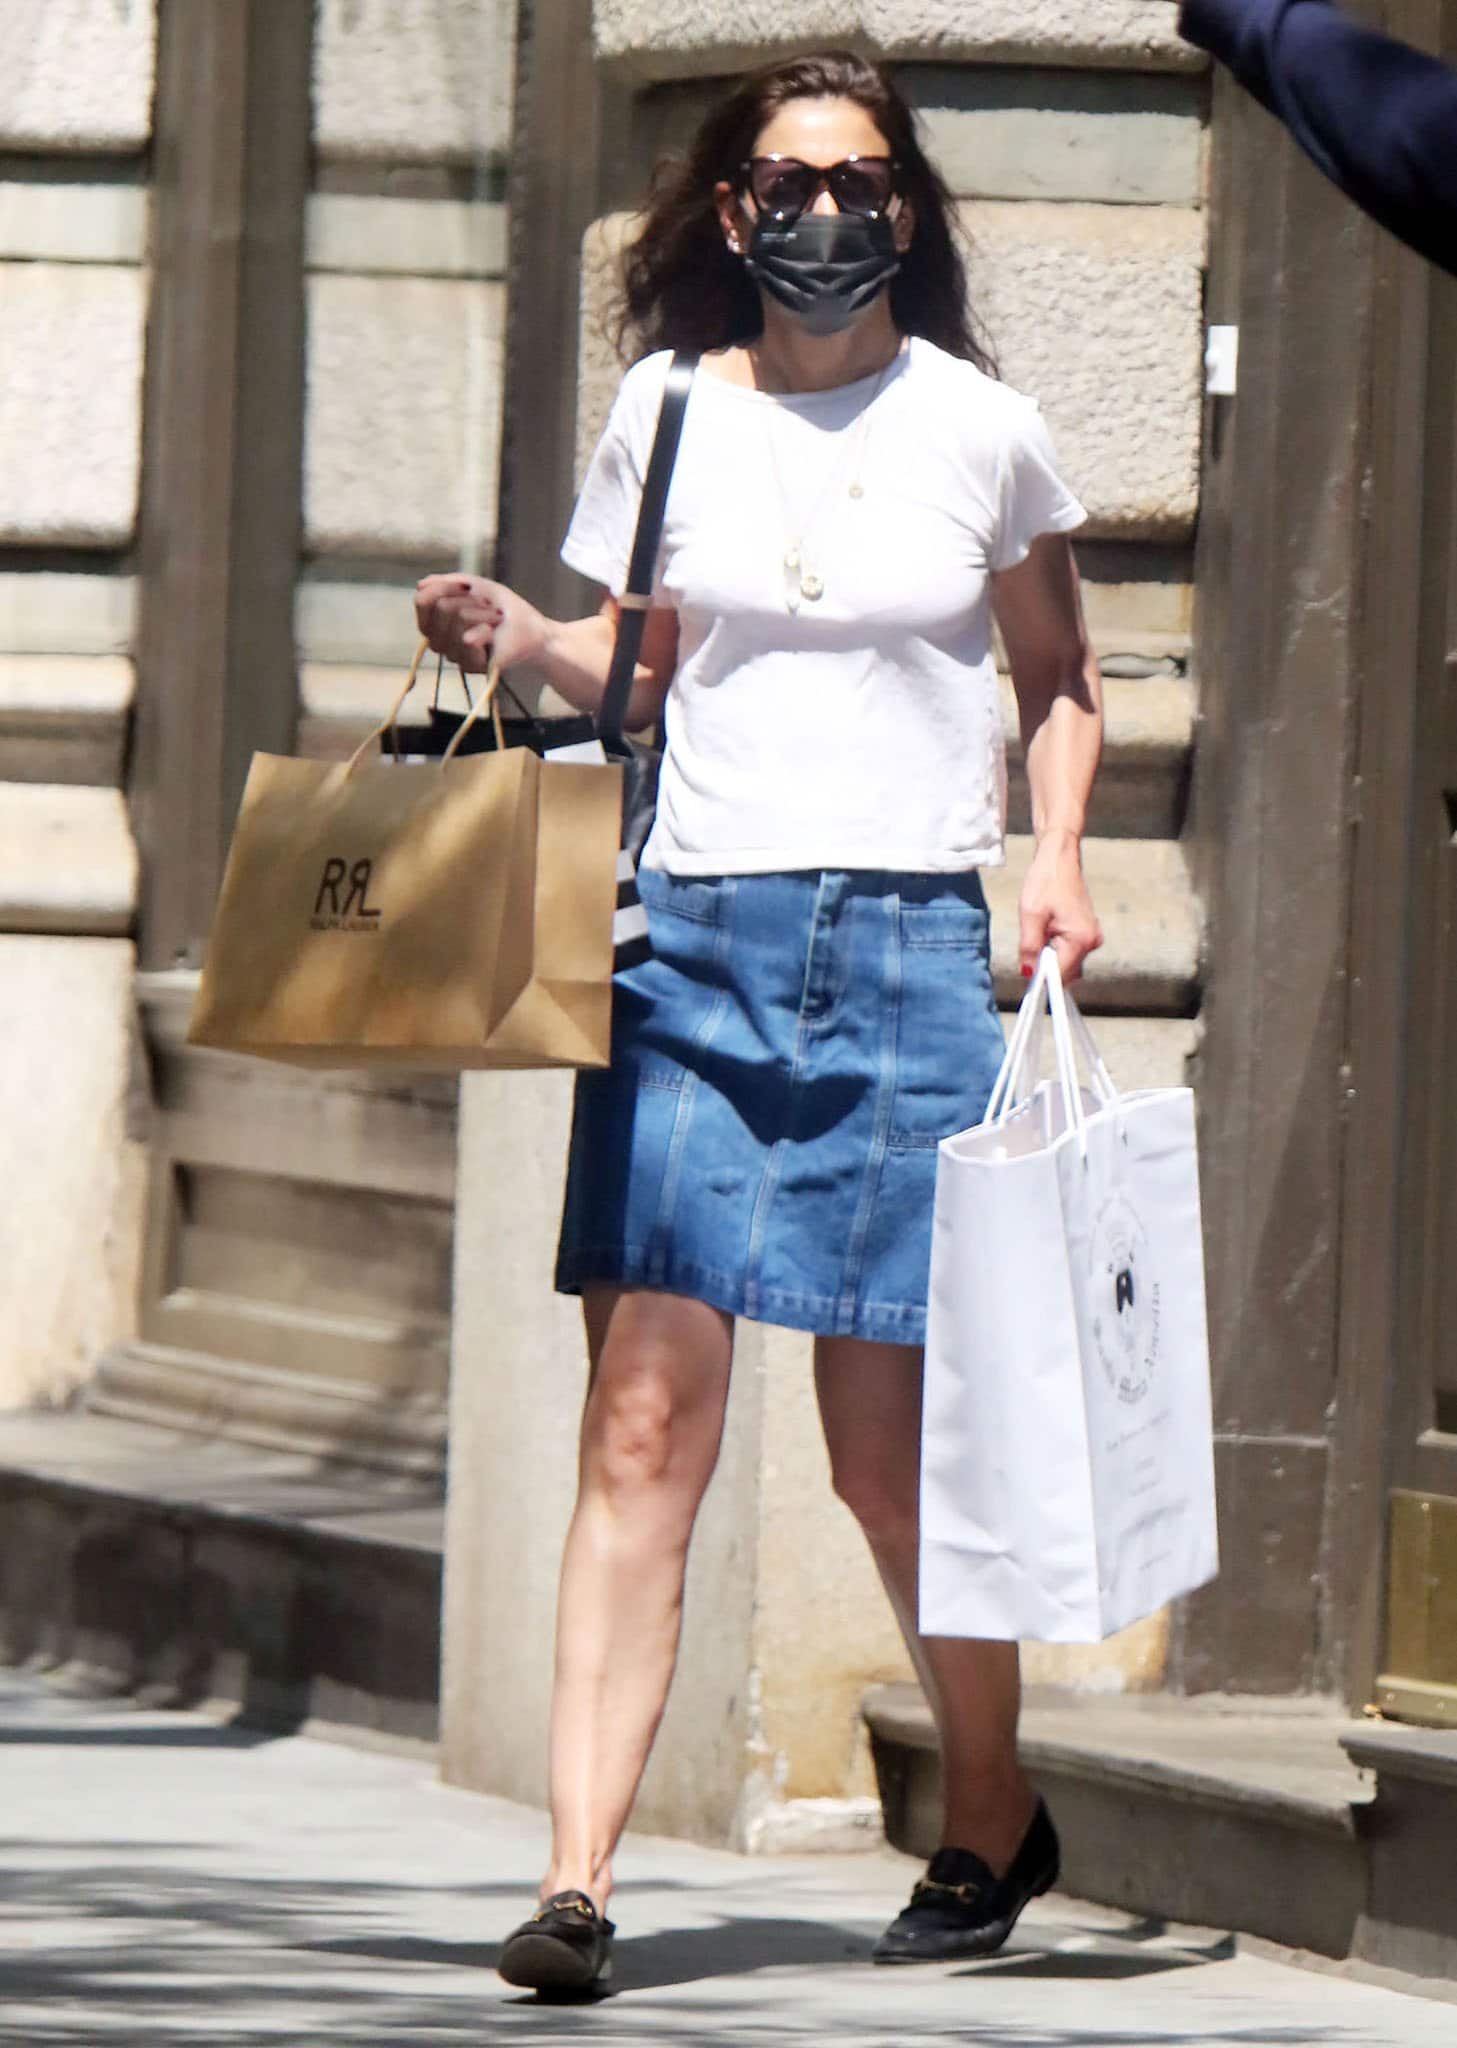 Katie Holmes steps out for retail therapy in New York City on May 21, 2021